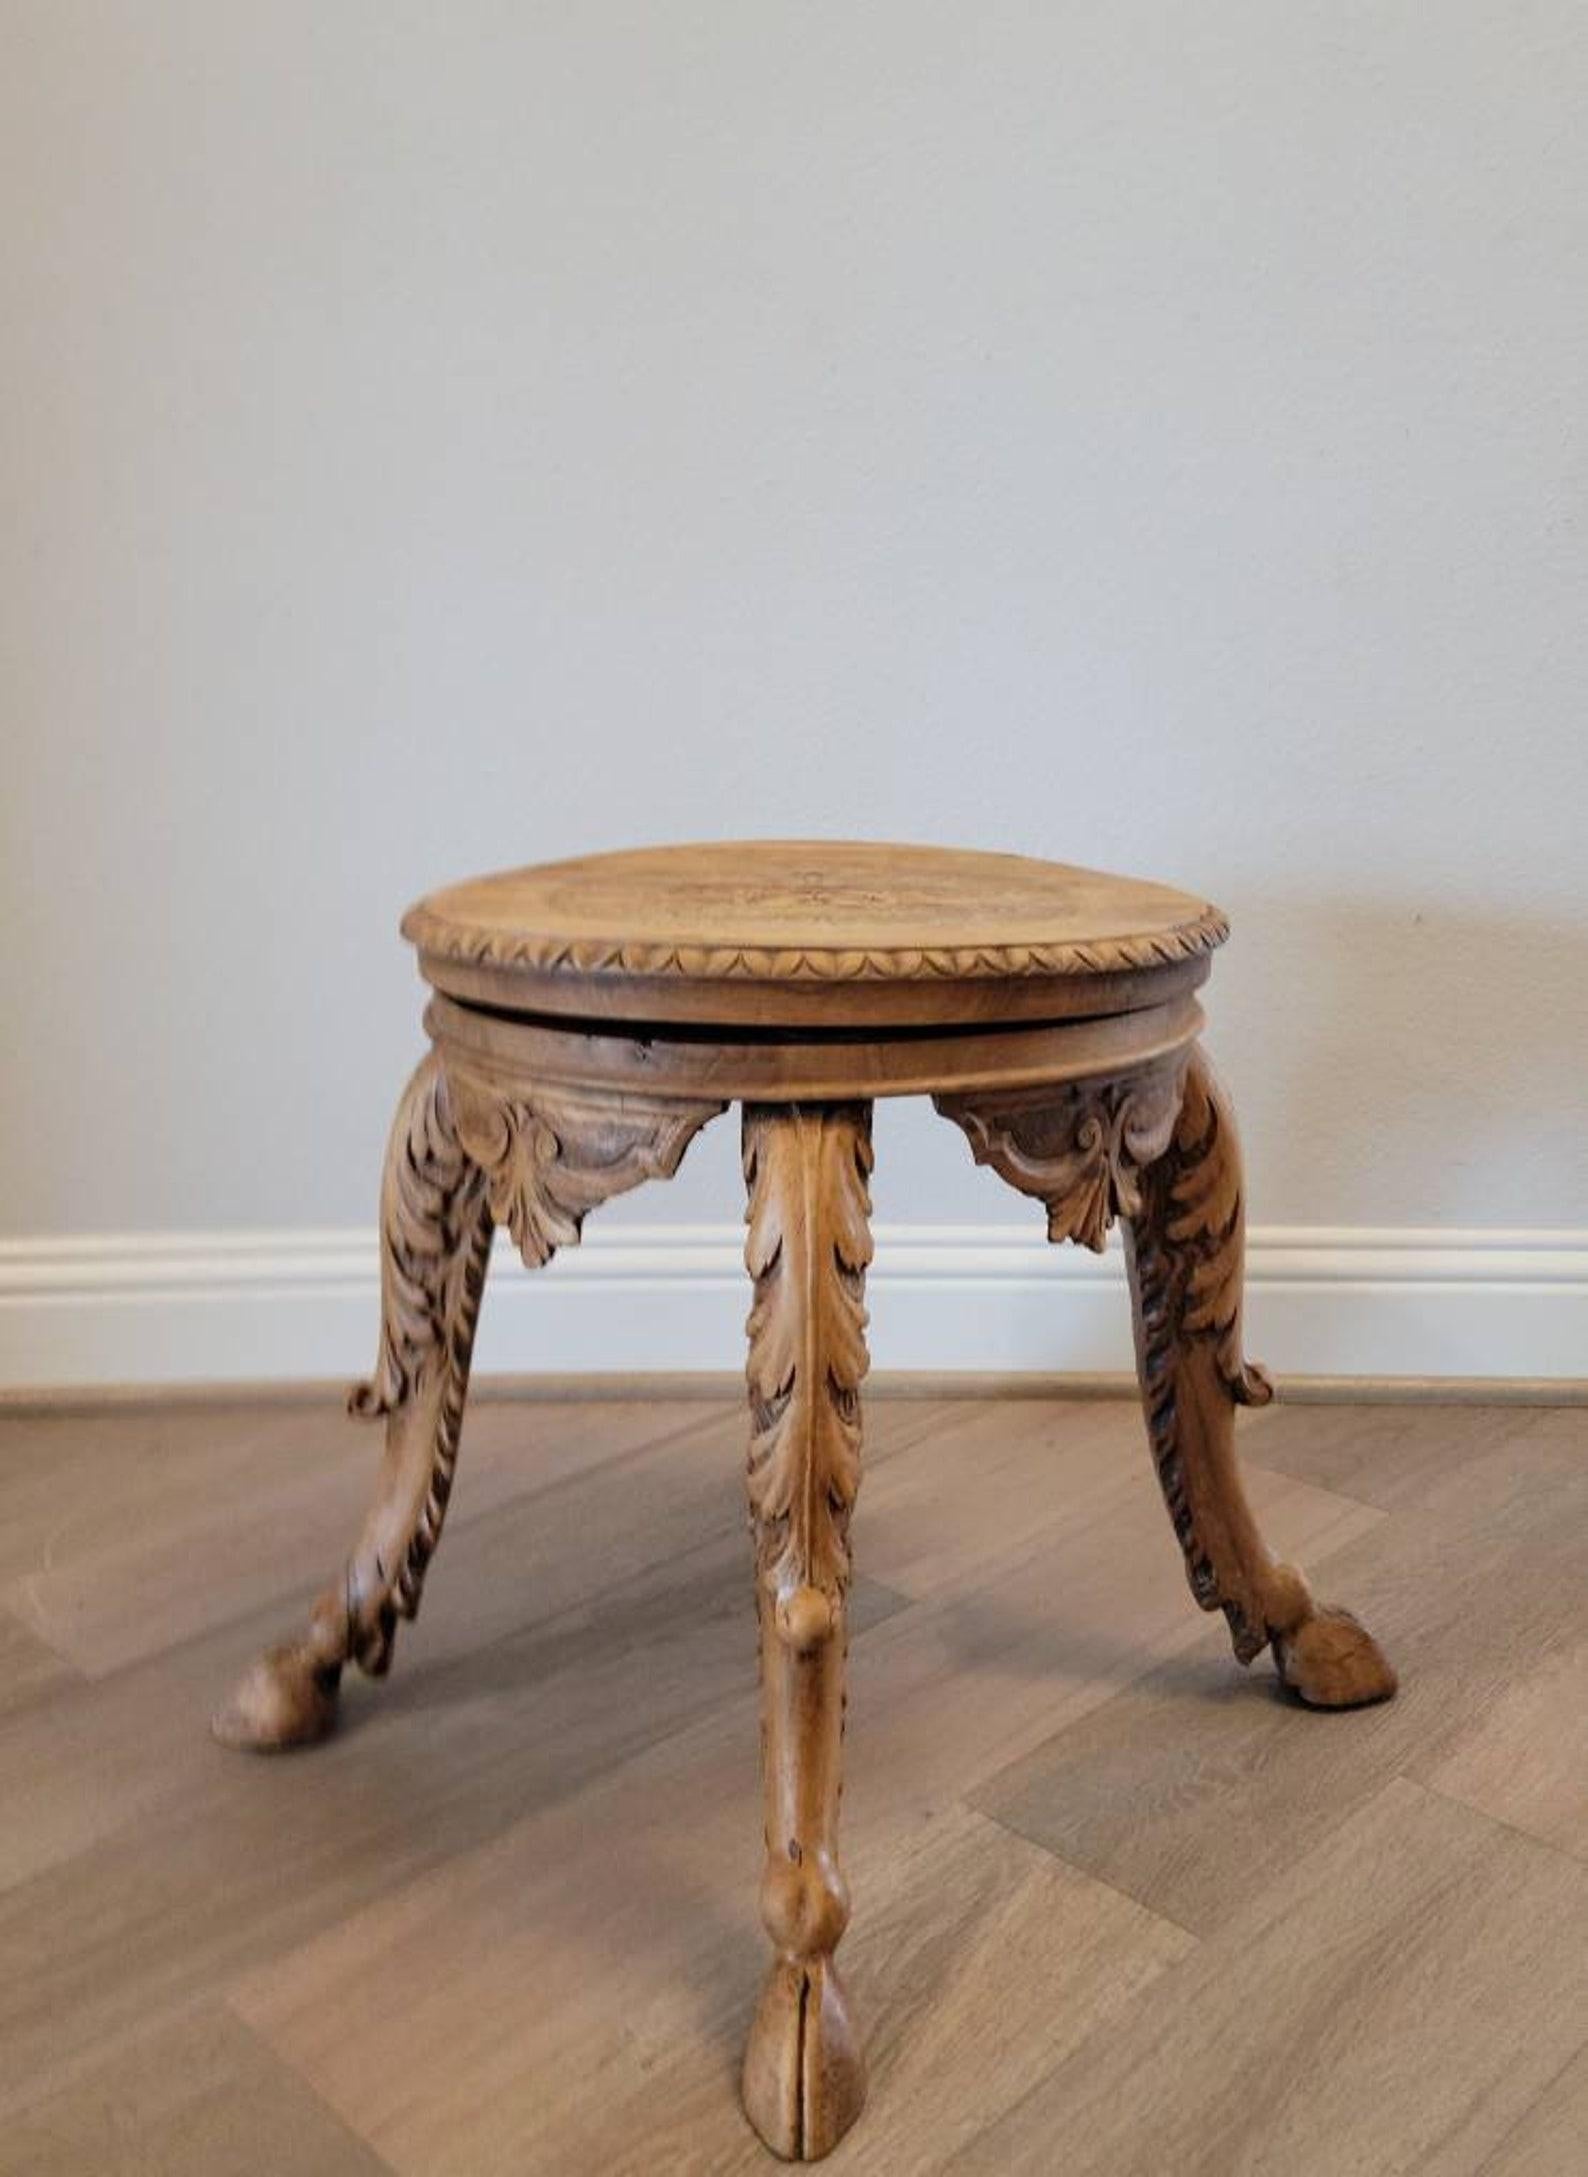 An exquisitely carved Nordic - Scandinavian birchwood antique piano stool (now chair side table) dating to the late 19th century. 

Most likely born in Sweden, circa 1880, featuring an exceptionally executed sculptural silhouette, with rich, fine